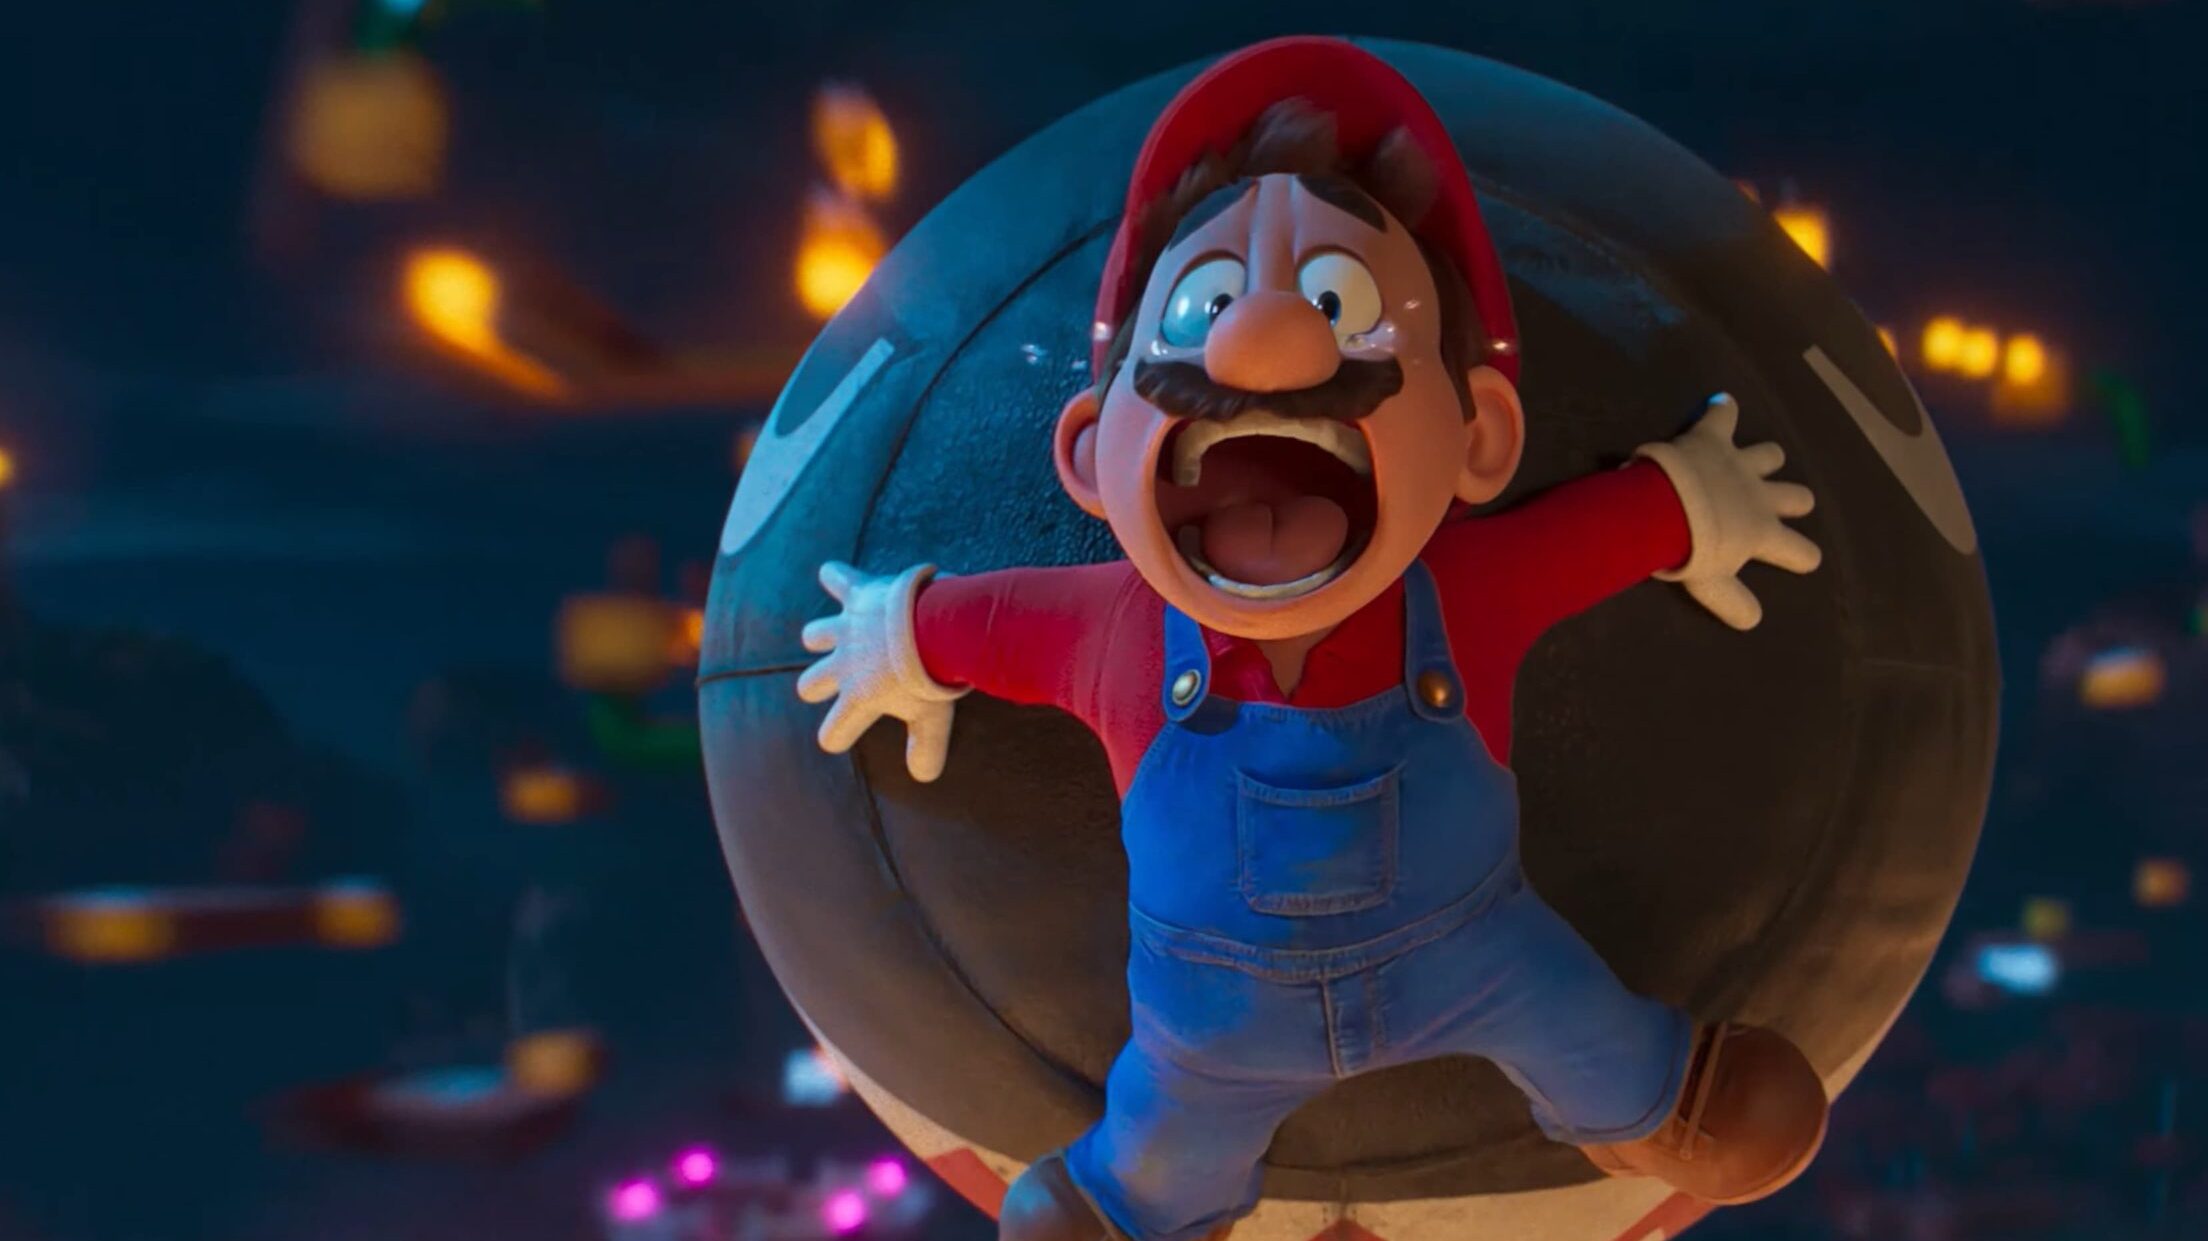 Super Mario Bros. Movie LIMITED EDITION Blu-ray & DVD Officially Announced  